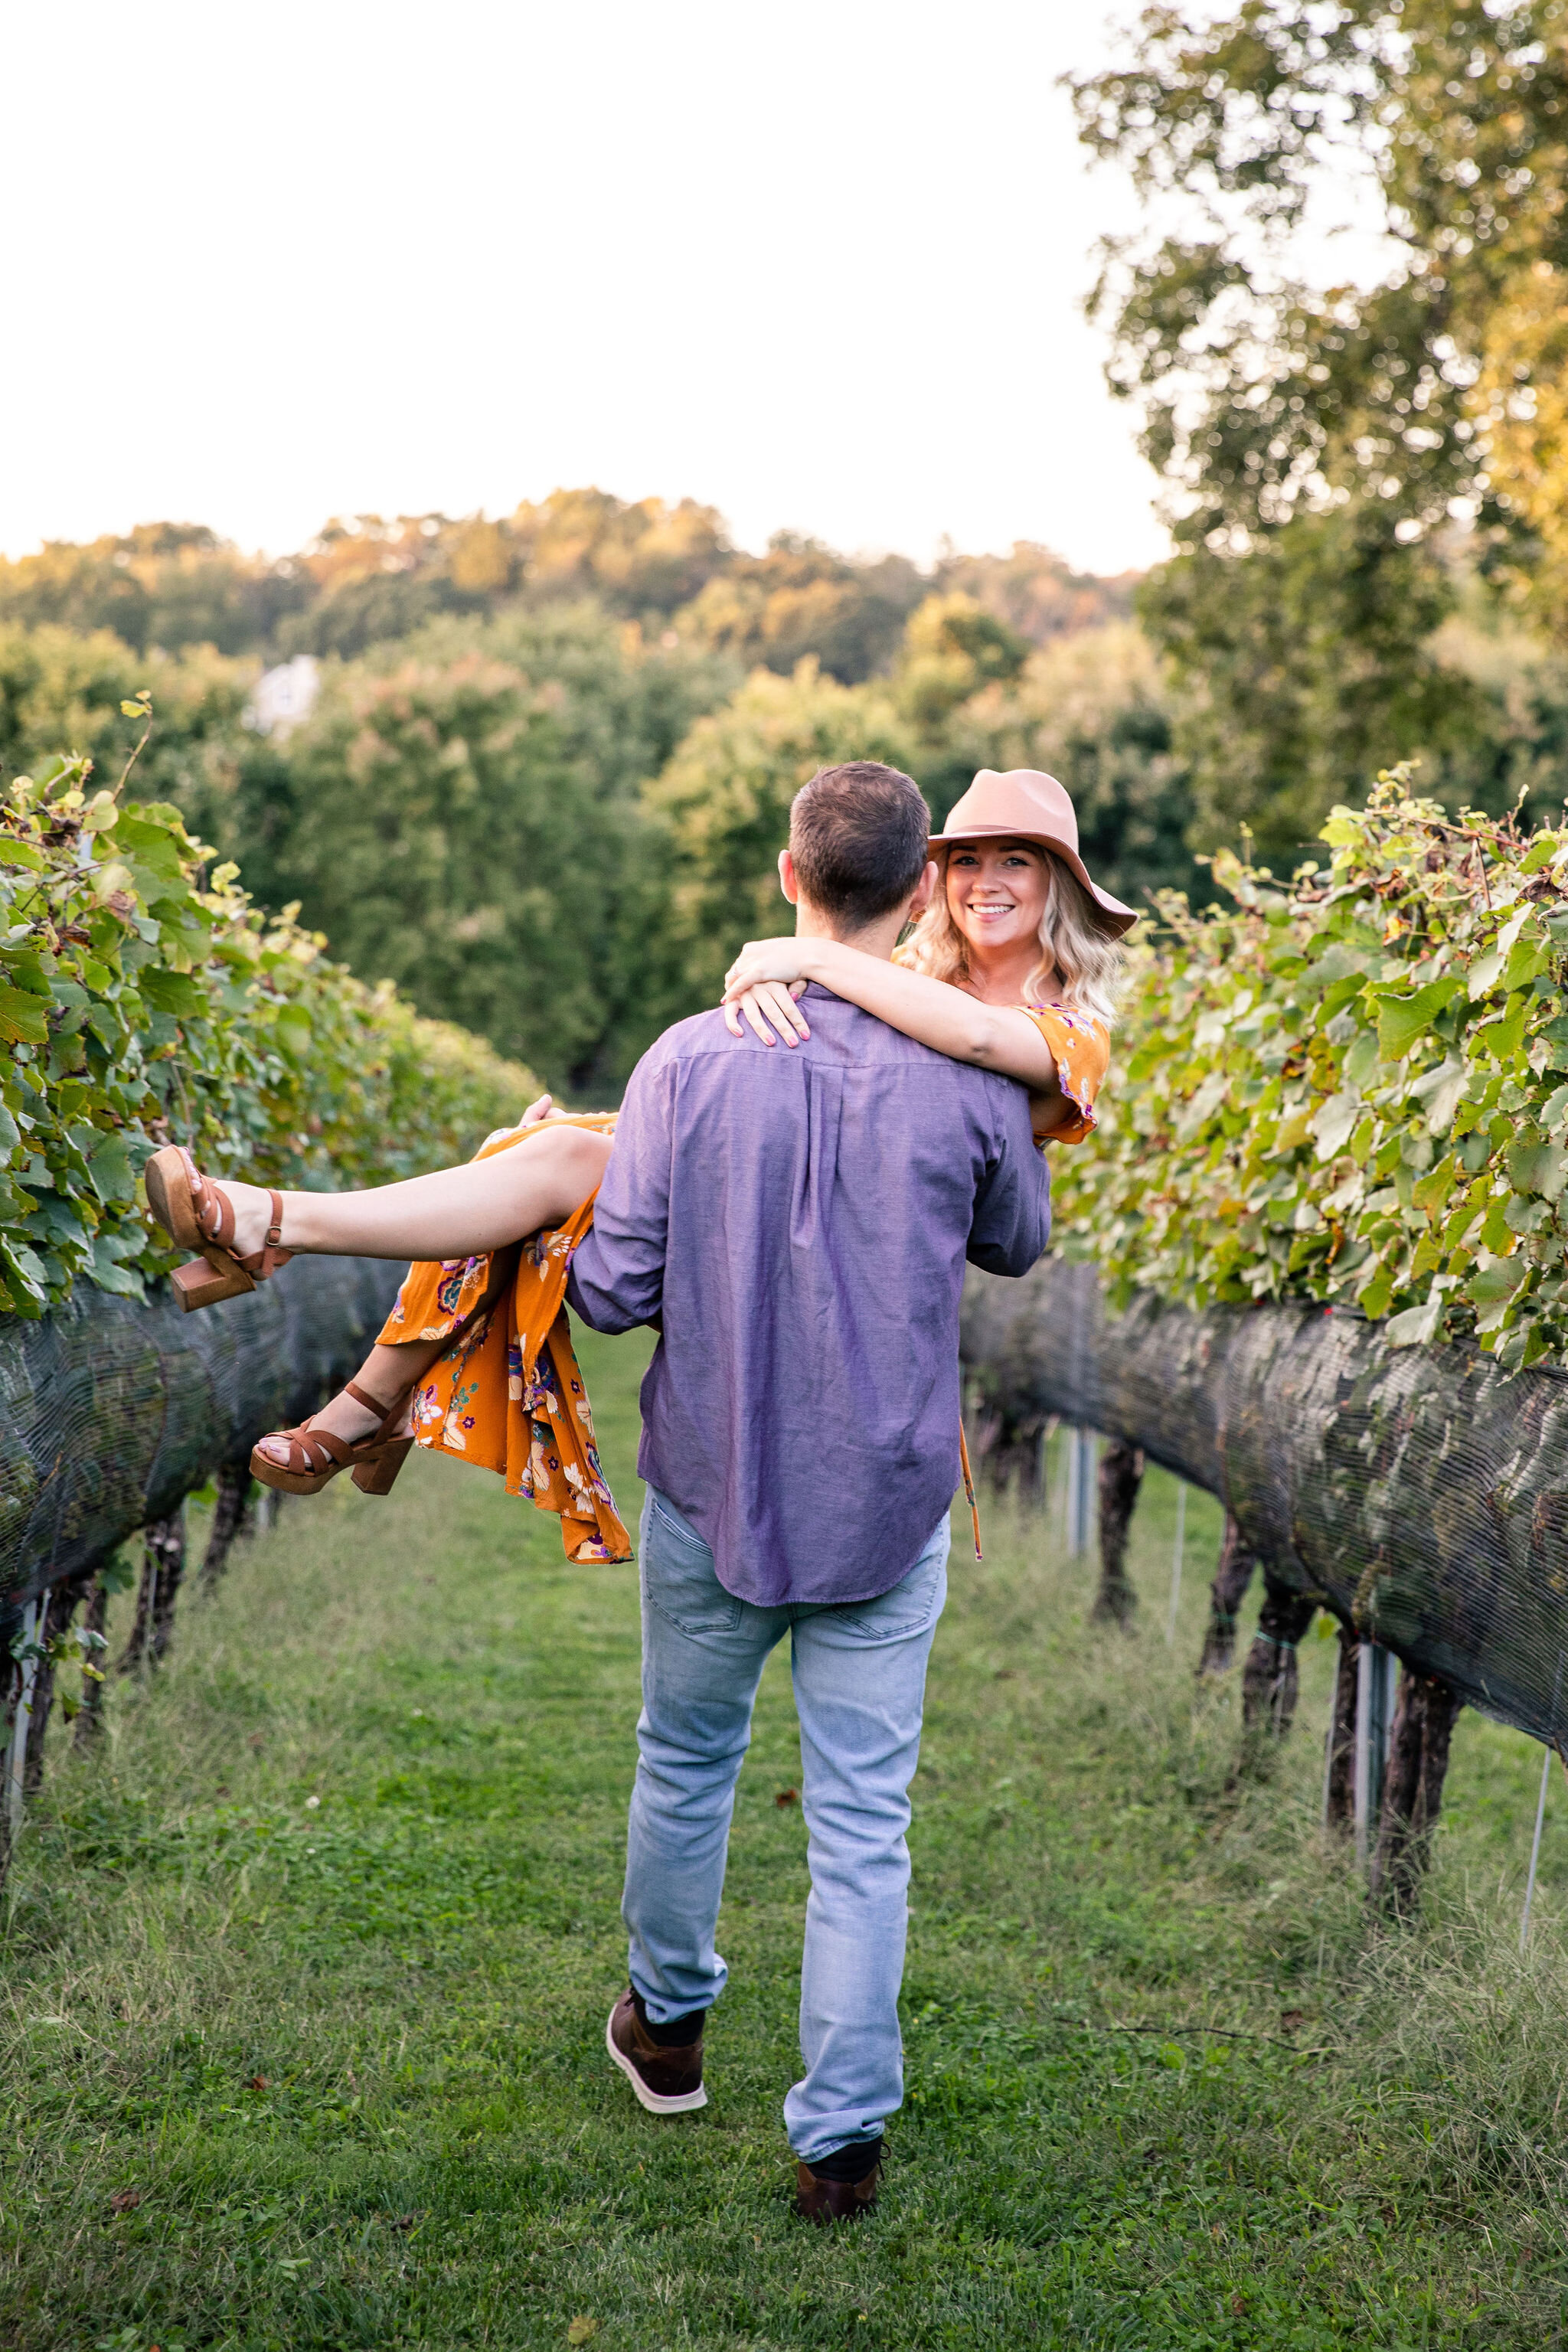 Rachel and Devyn had to cancel her planned 2020 wedding so instead their photographer suggested an engagement shoot on that day instead. Needless to say it was a wonderful idea. Photographed at Galer Estate Vineyard &amp; Winery by Philadelphia wedd…